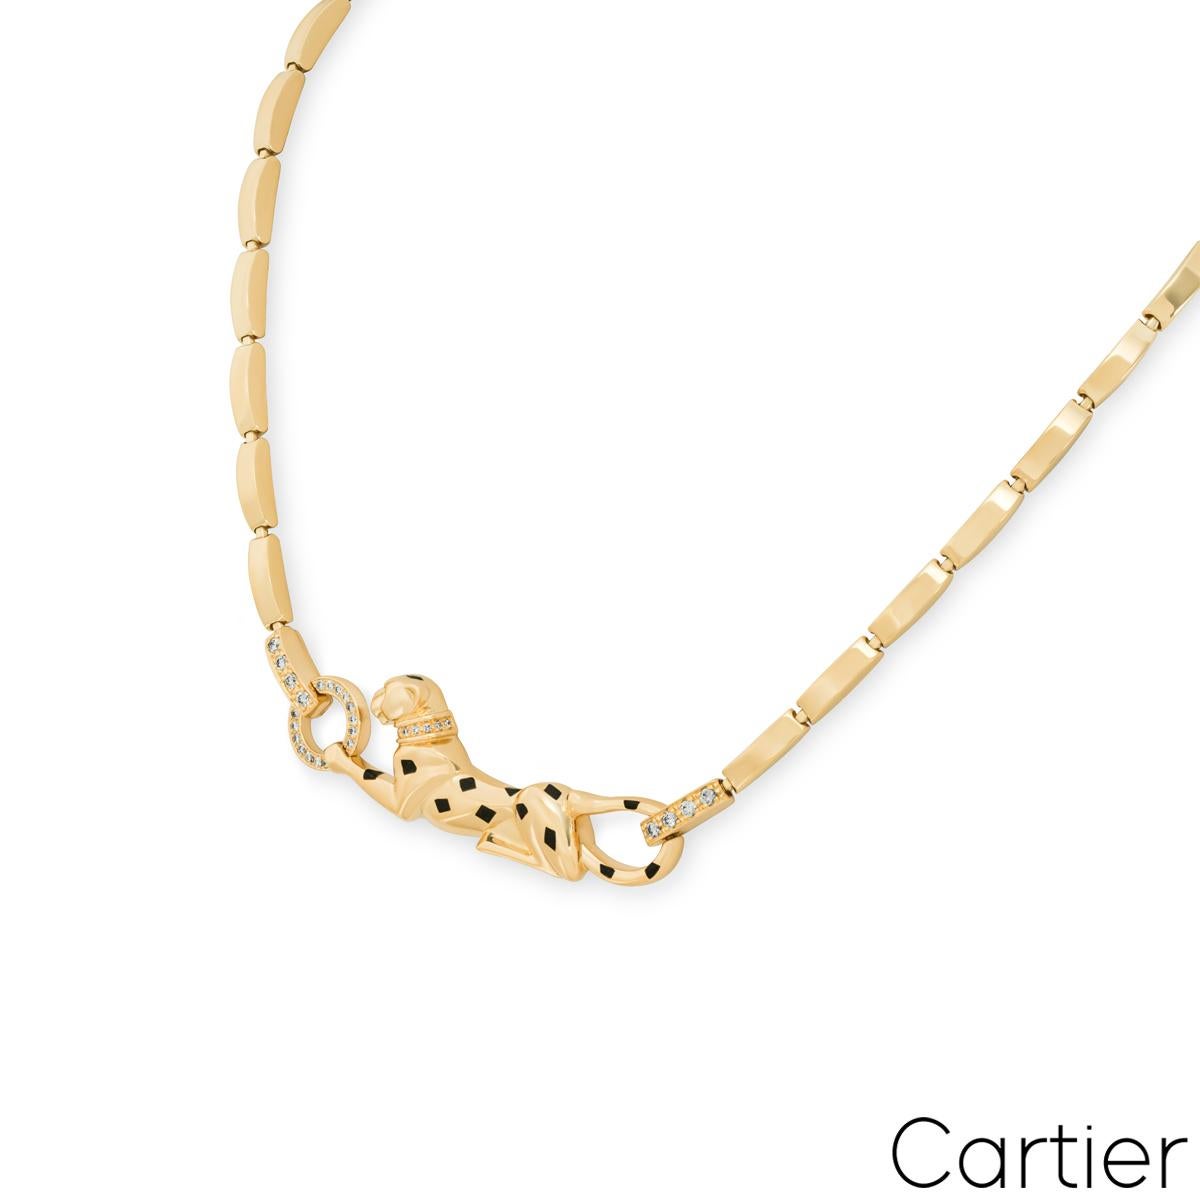 A striking Cartier 18k yellow gold diamond necklace from the Panthère De Cartier collection. The necklace features a panther motif with bold black lacquer spots, a round brilliant cut tsavorite eye, an onyx nose and is further complemented by 32